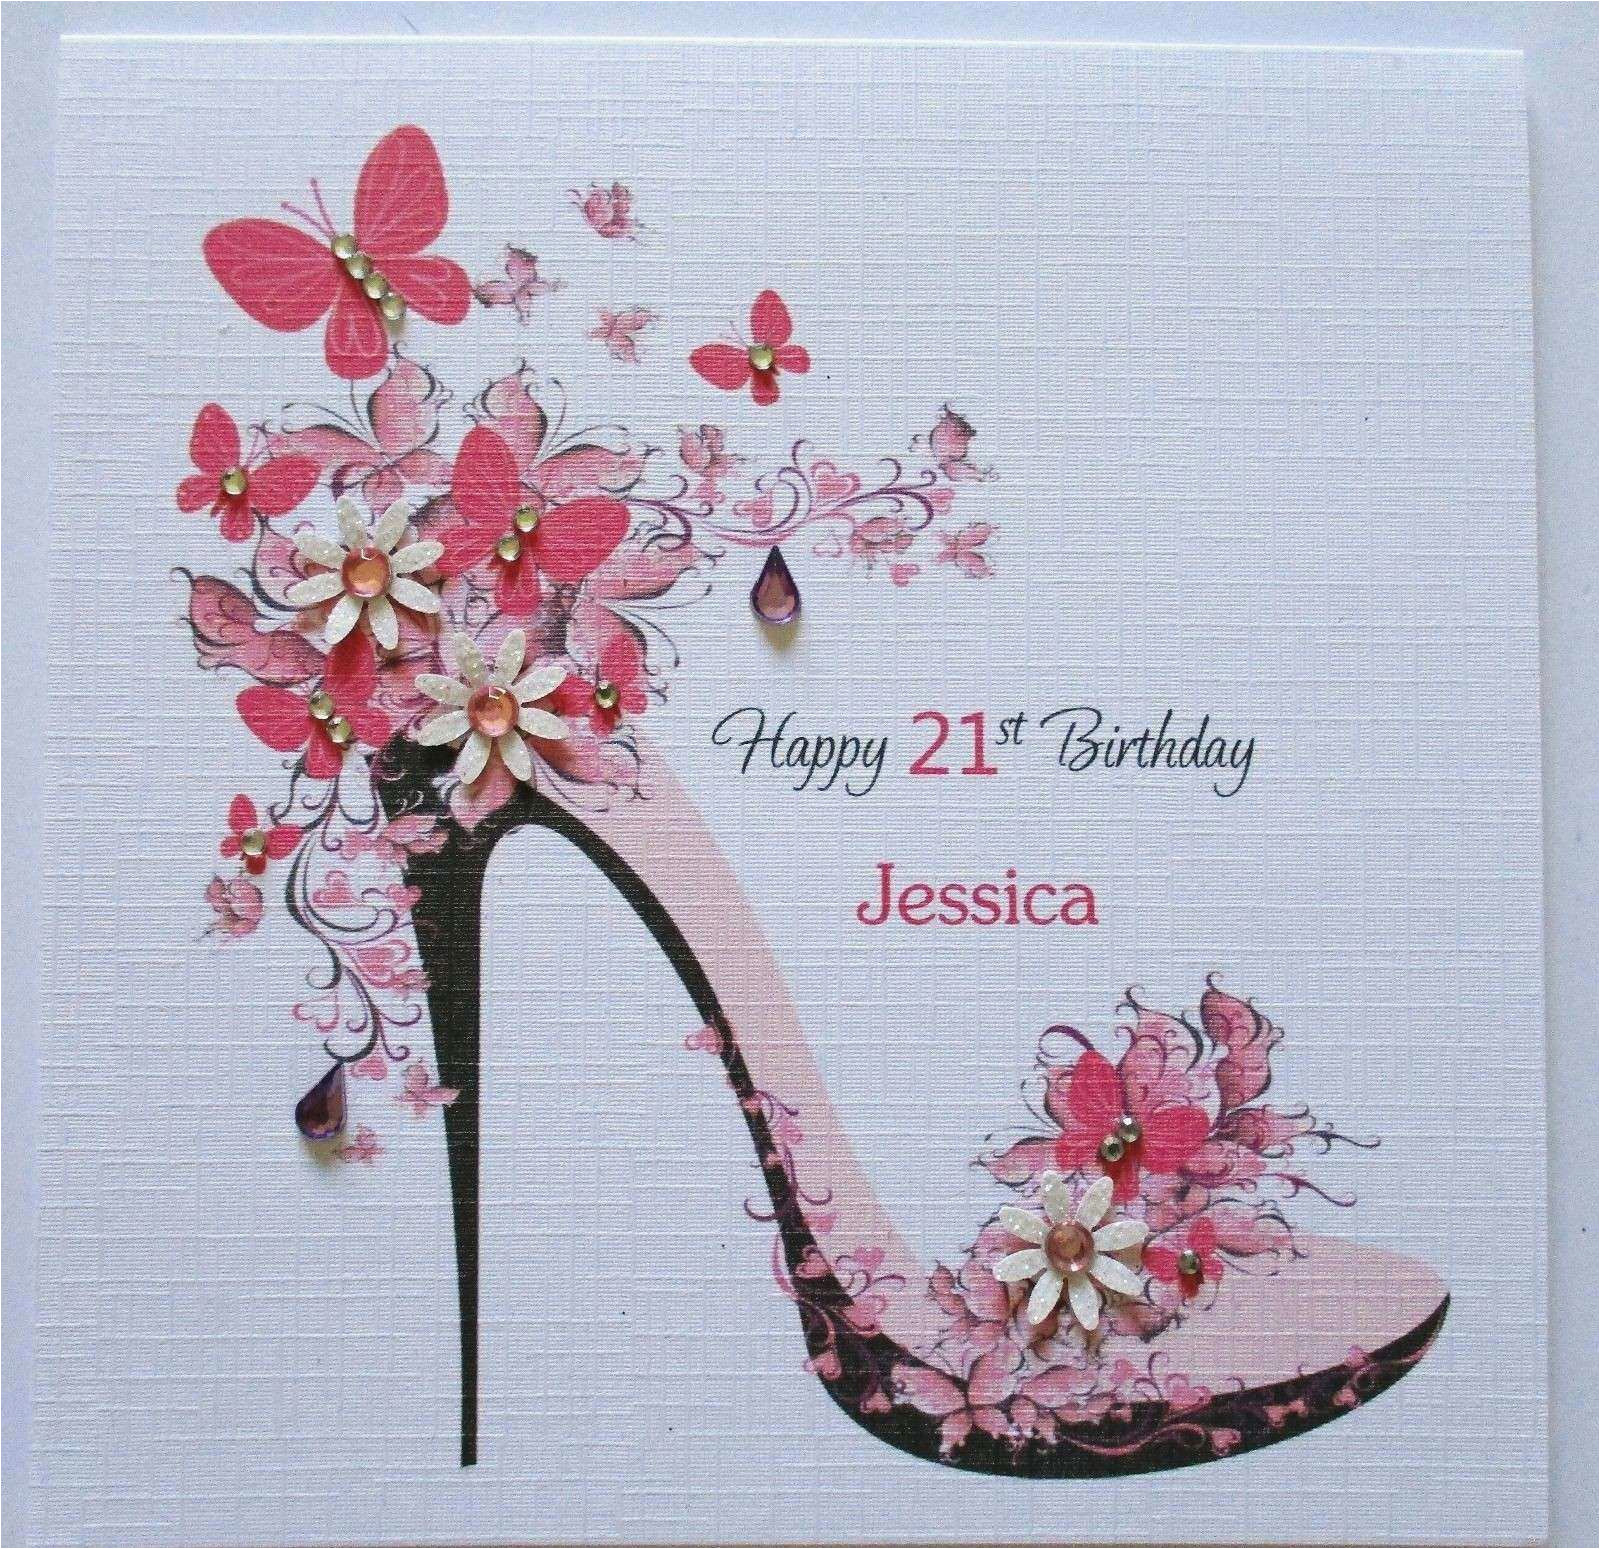 Unique Birthday Card Ideas Diy Ideas For Greeting Card Homemade Valentine Gifts For Him 22nd